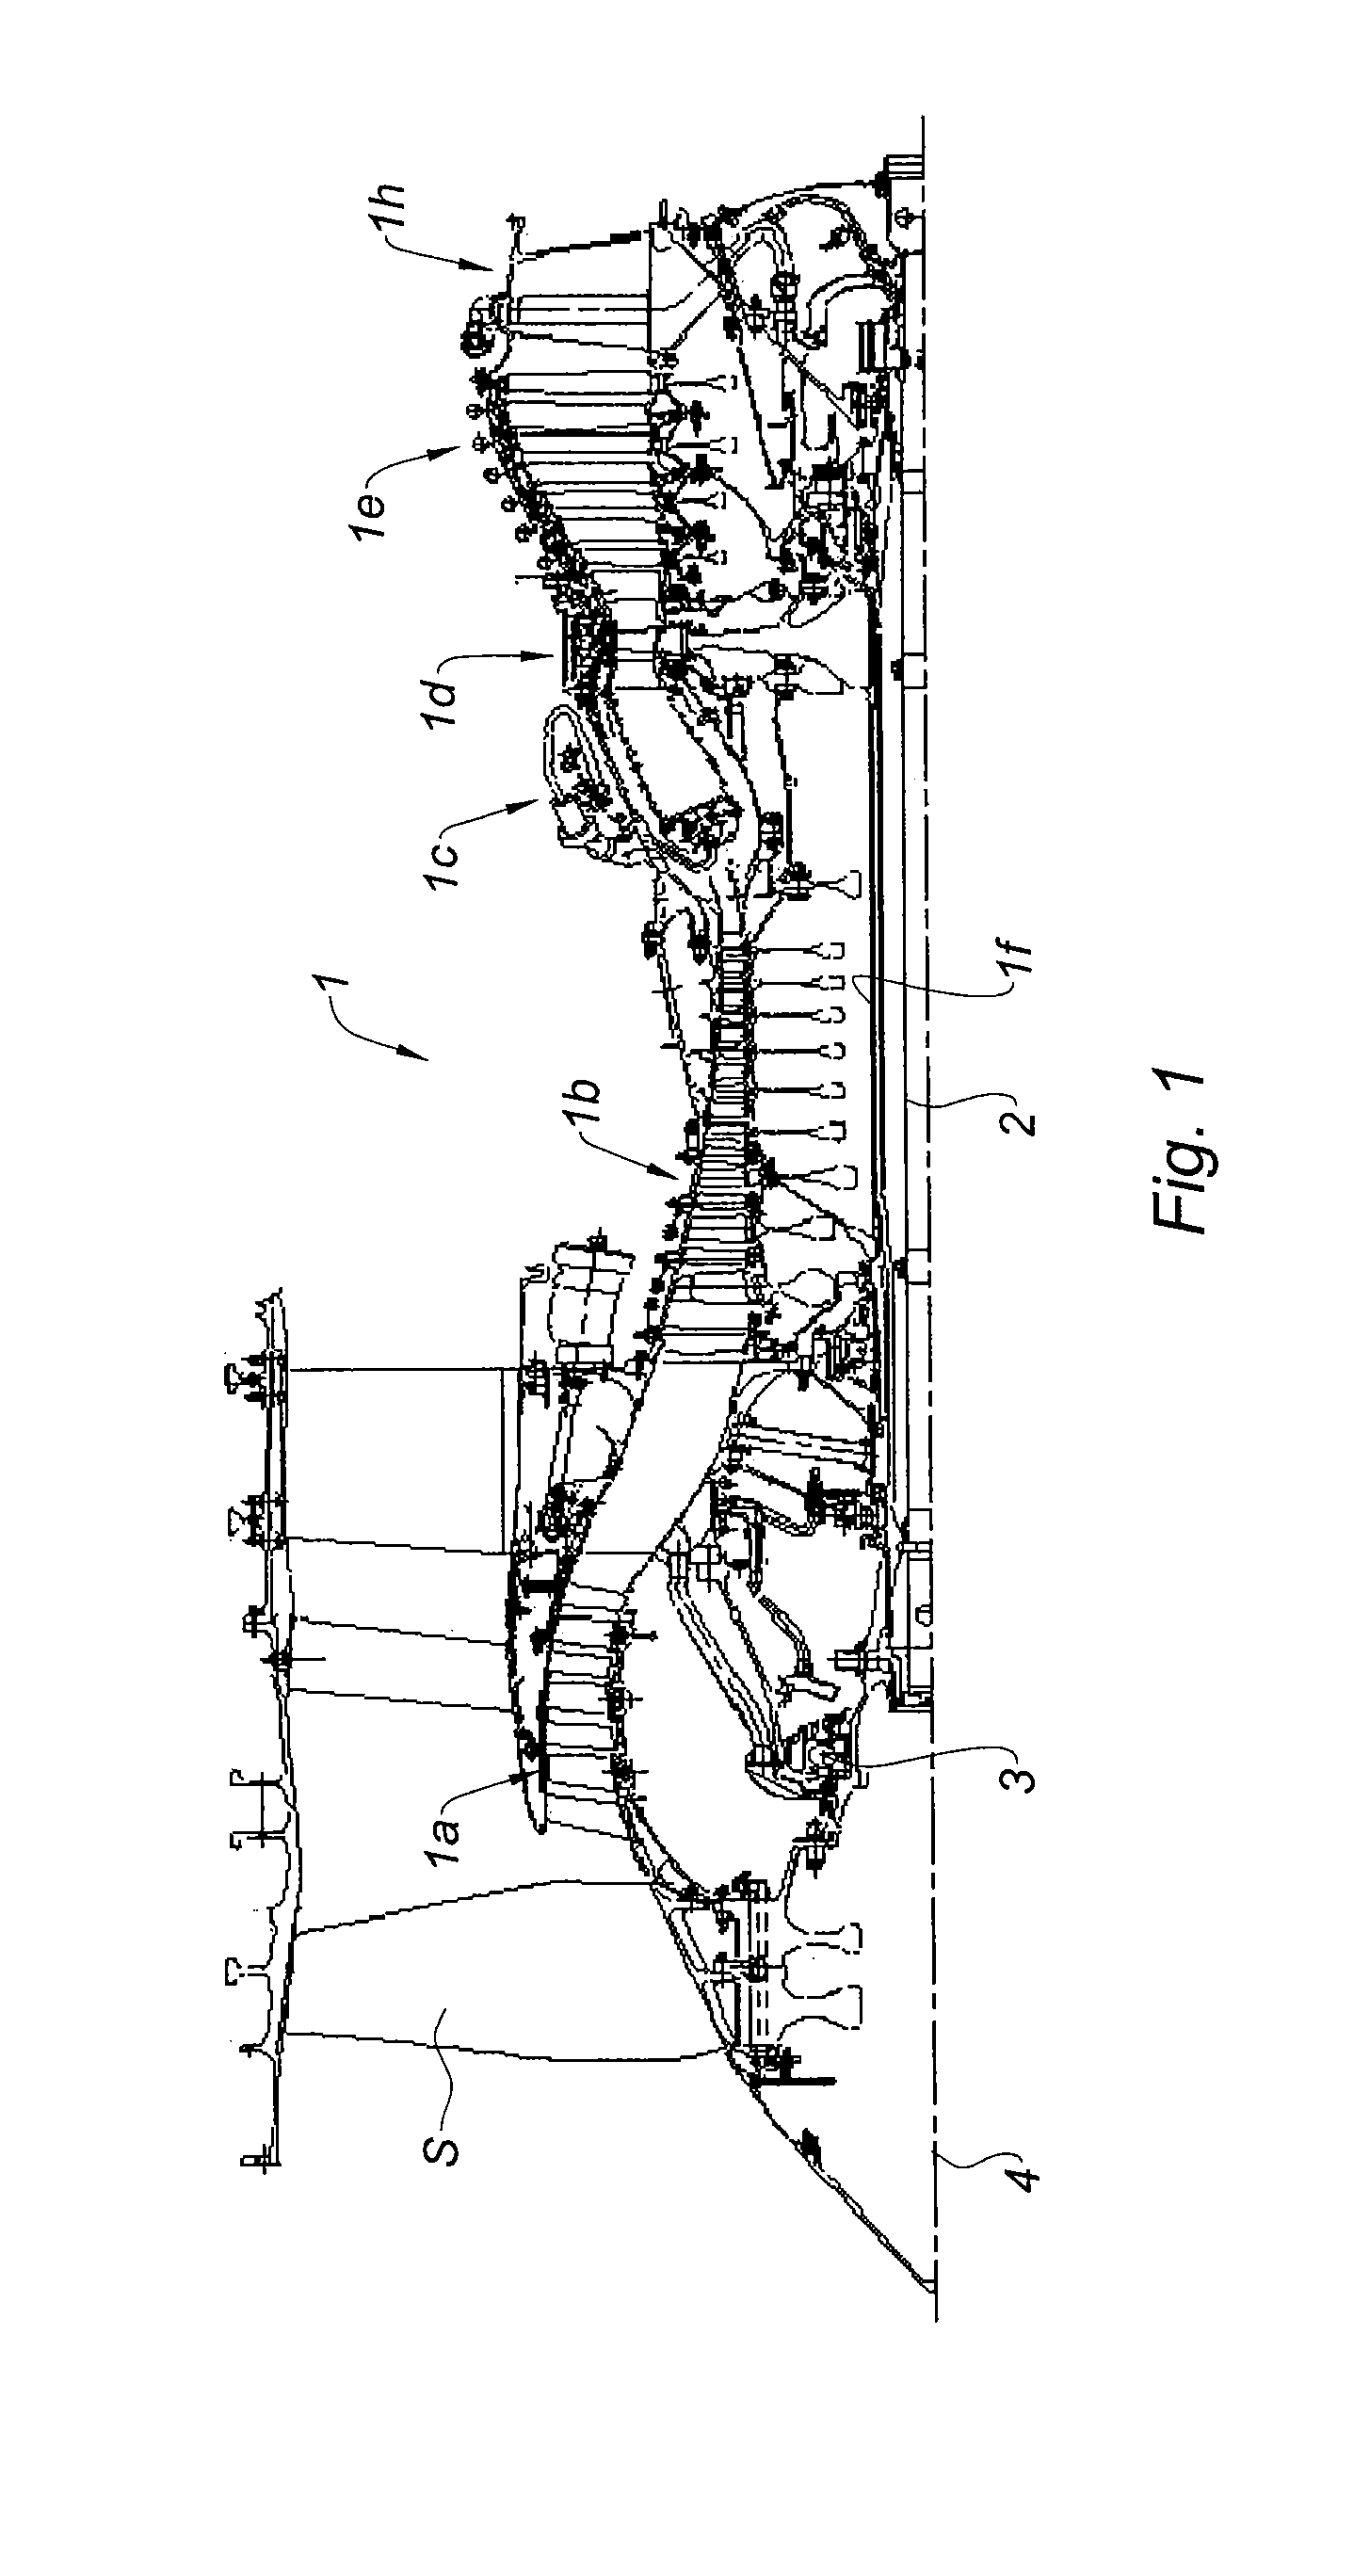 Reduction gear with epicyclic gear train having roller-bearing-mounted planet spindles